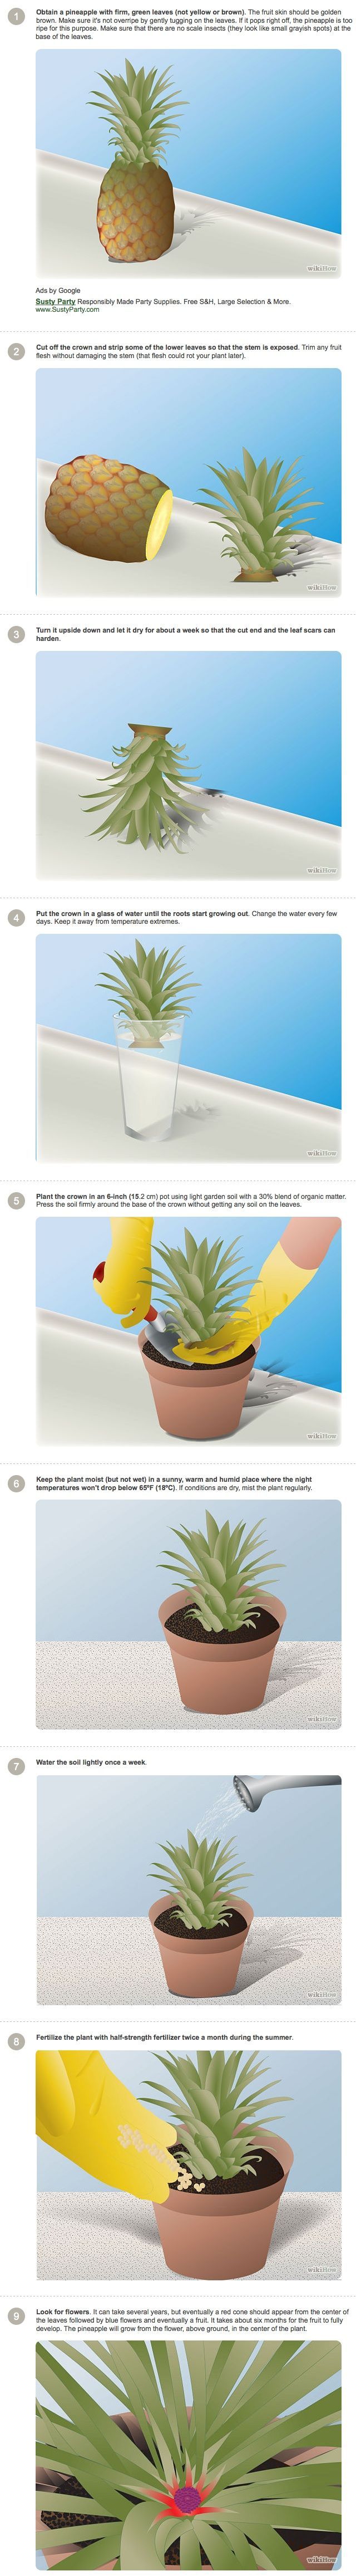 How to grow a pineapple